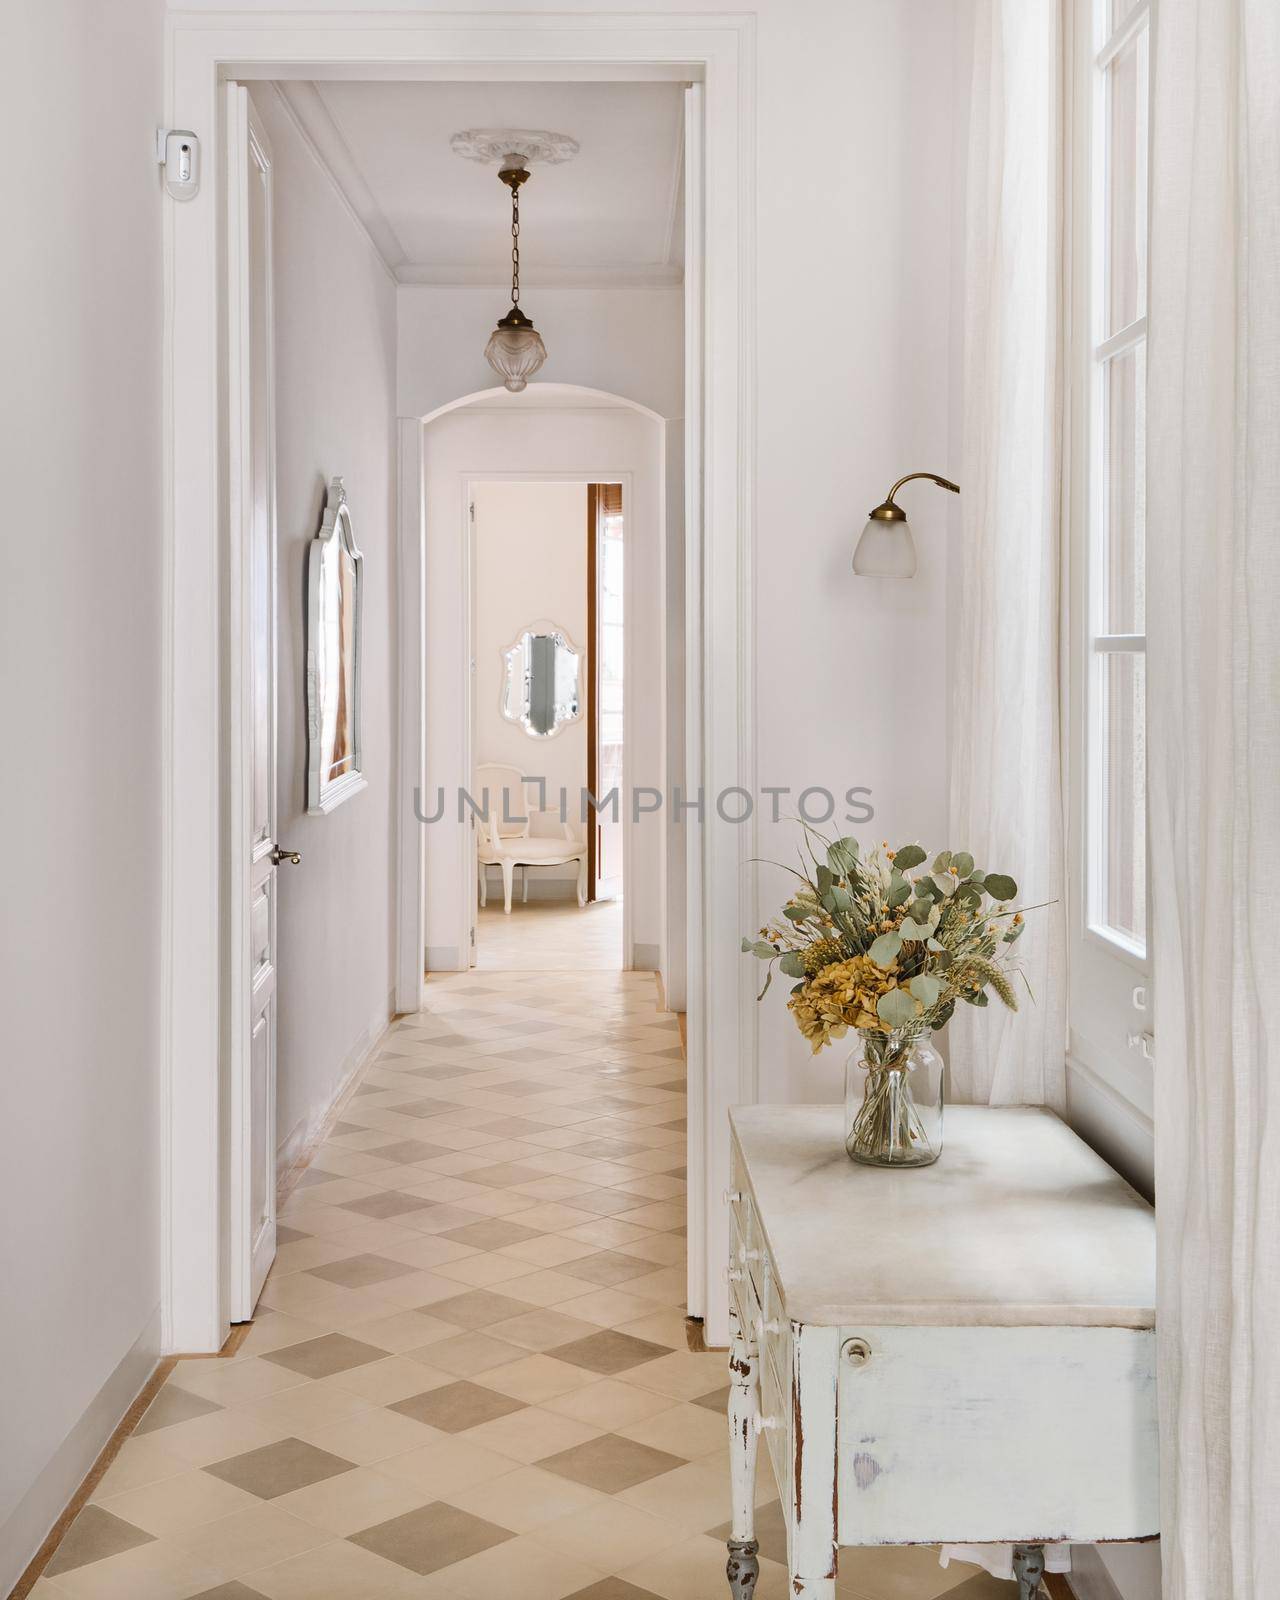 Hallway decorated in vintage style overlooking a long corridor by apavlin